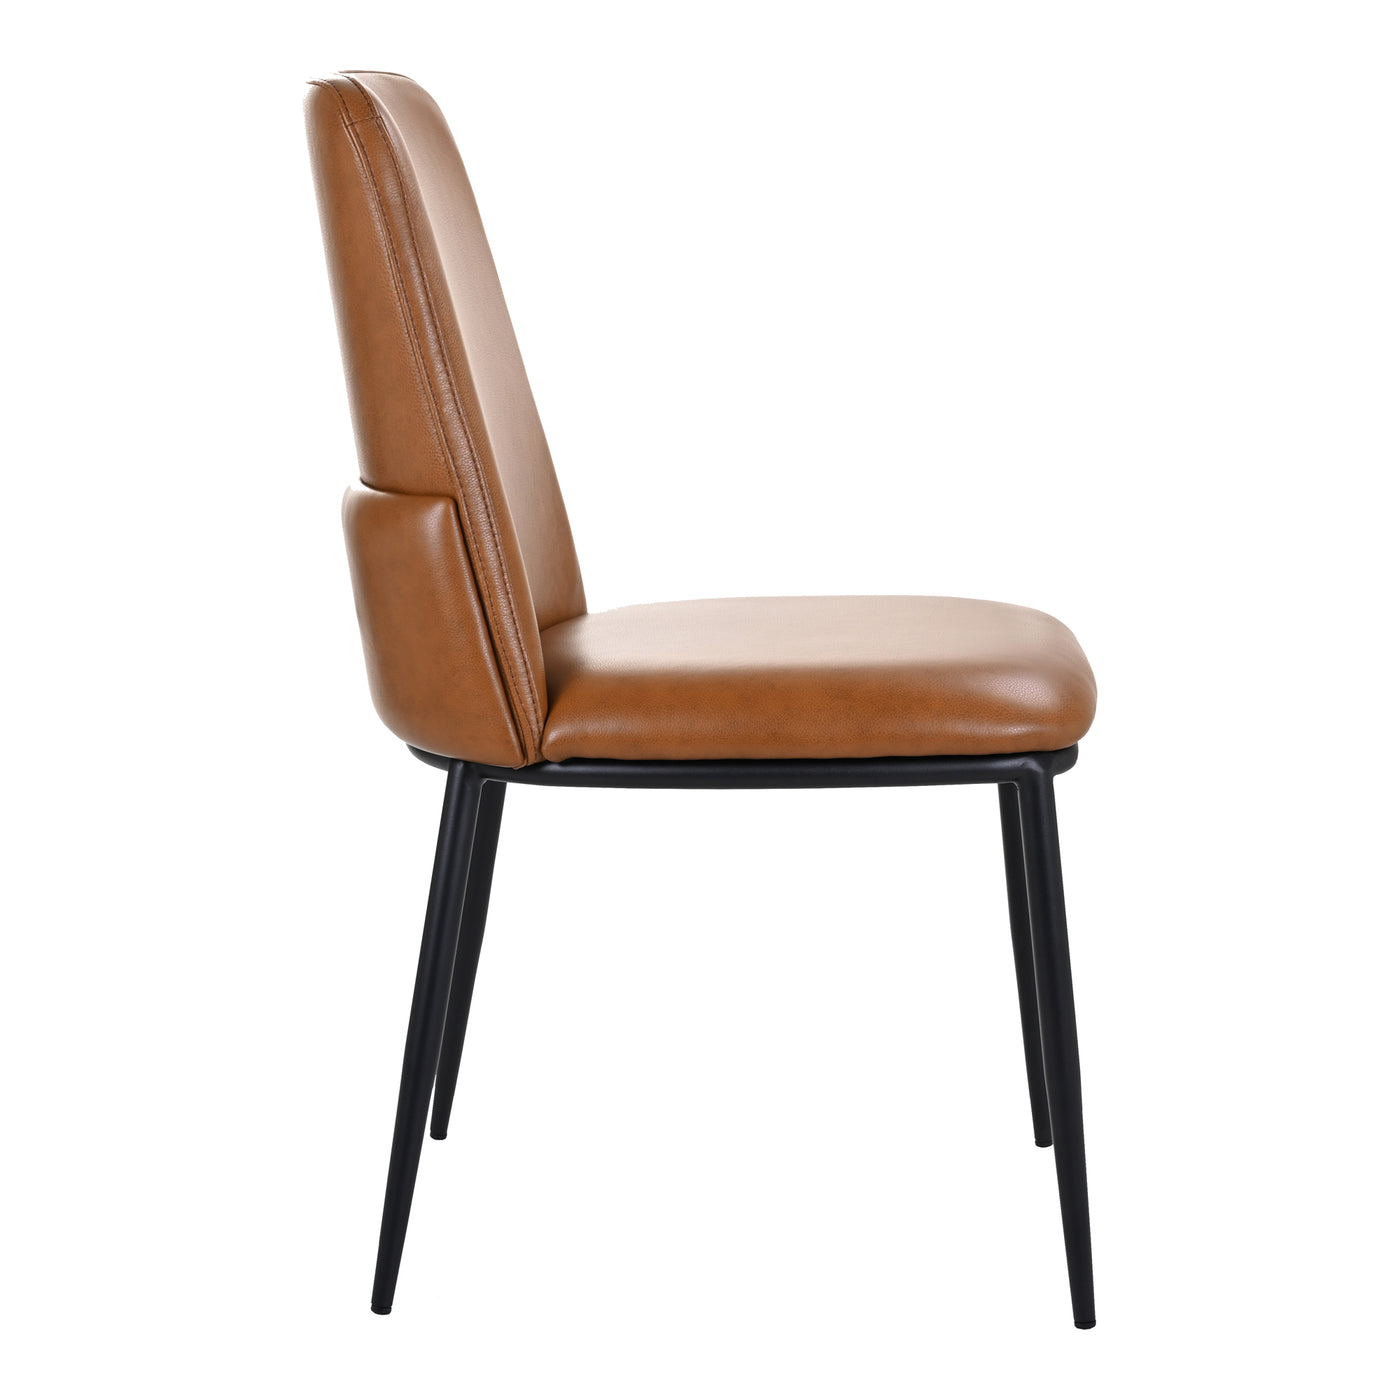 A reworked classic, Douglas takes the vintage diner chair silhouette to new, modern highs. Offering up a simple, contempor...